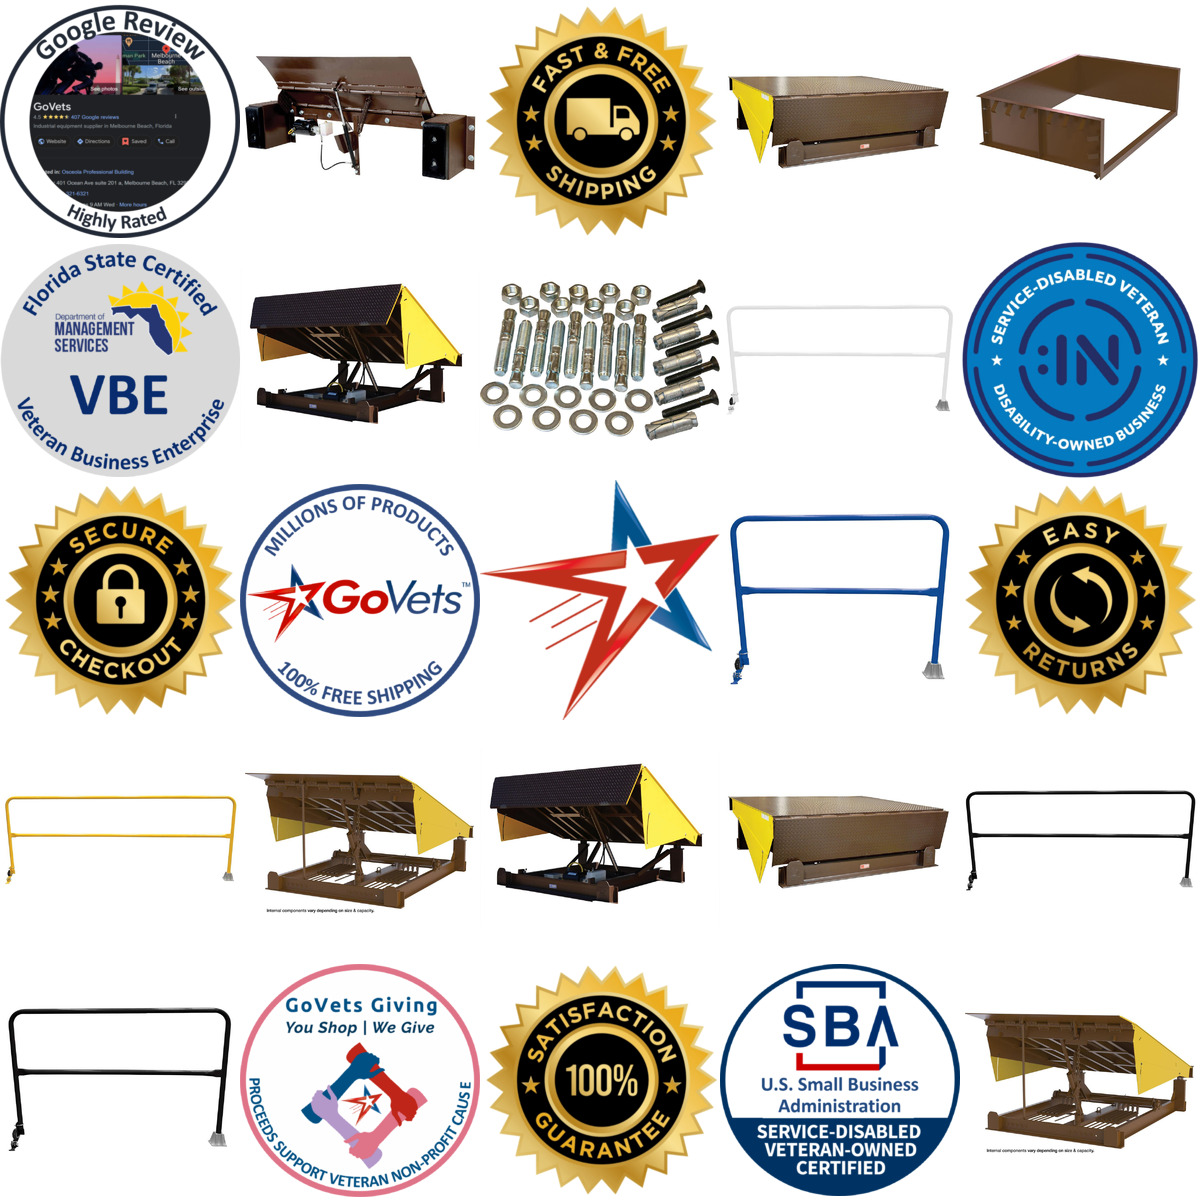 A selection of Dock Levelers and Accessories products on GoVets